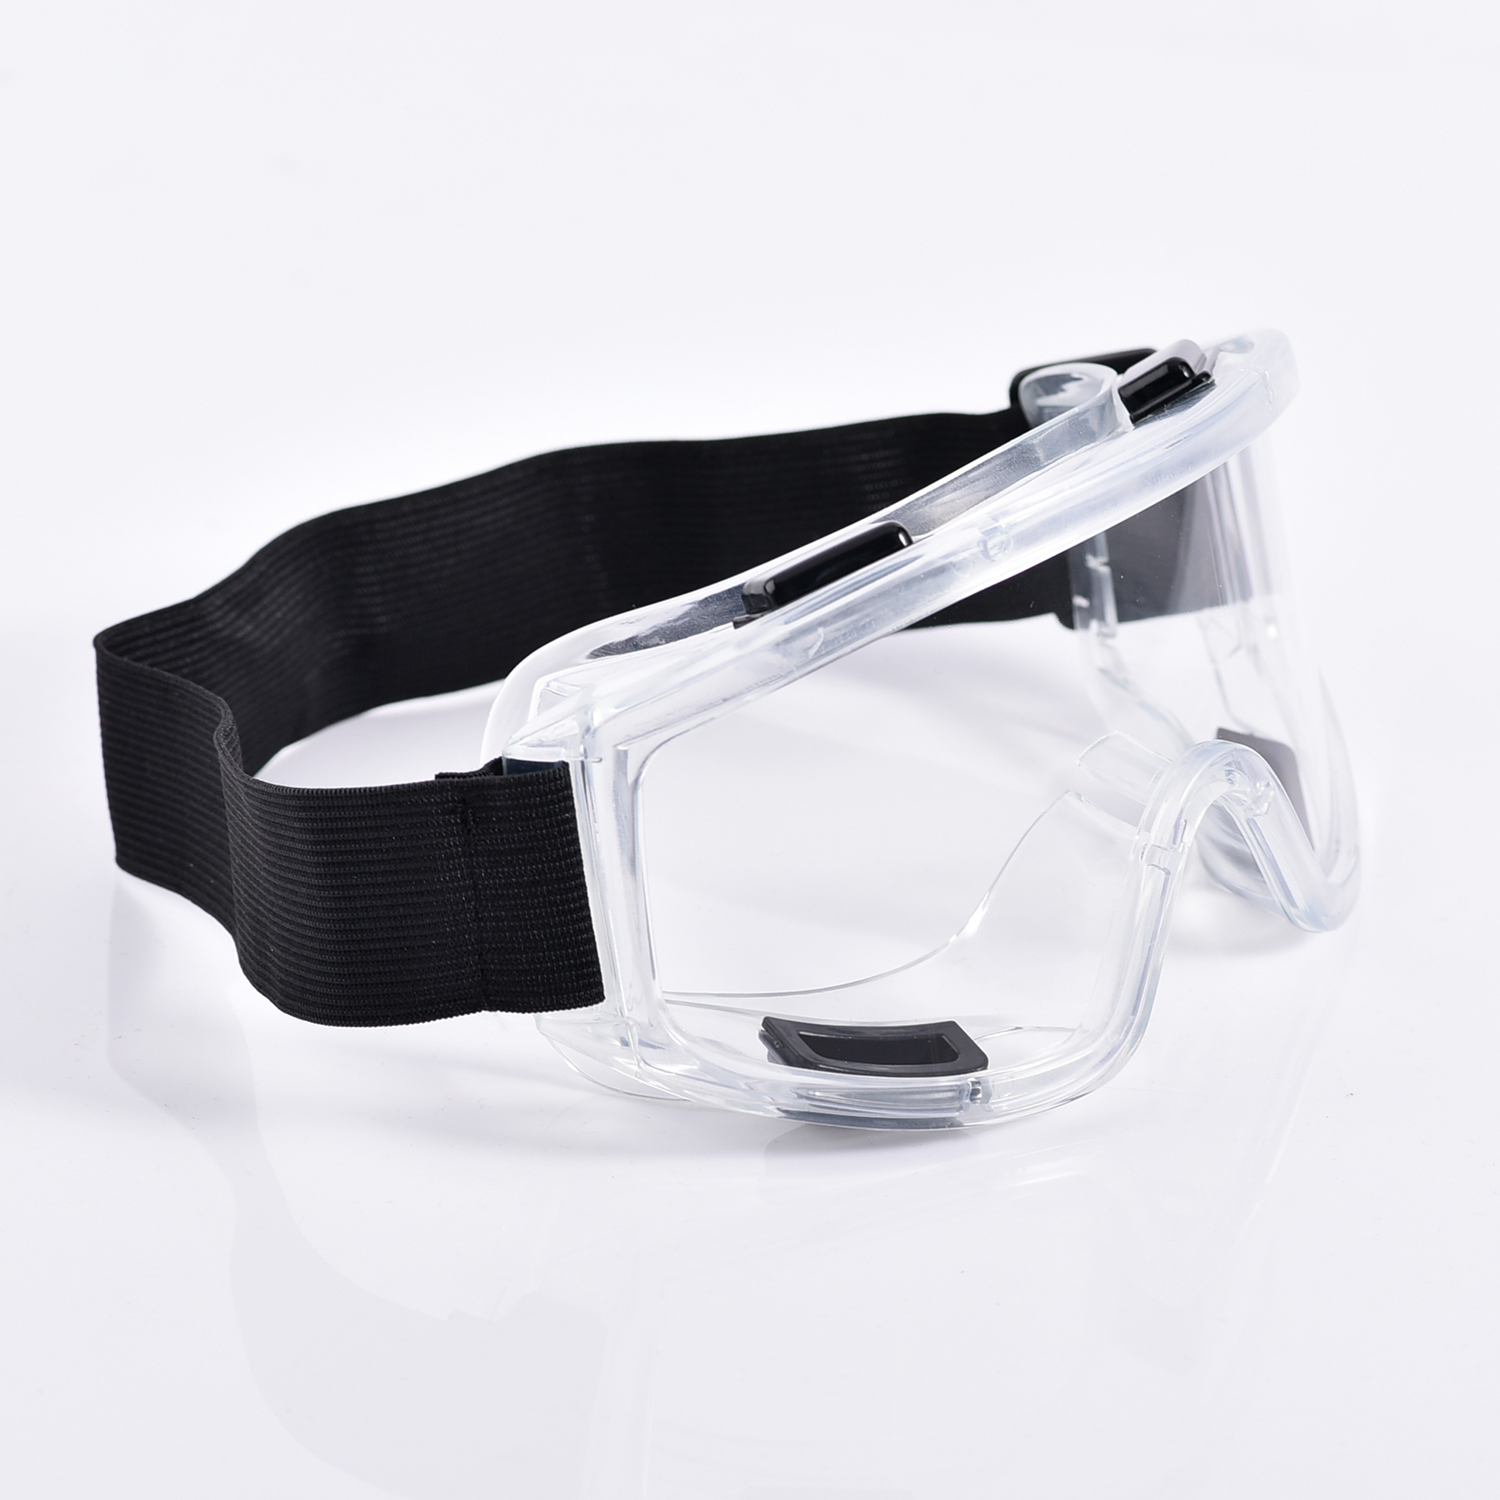 Clear PC Lens Safety Goggles KS503